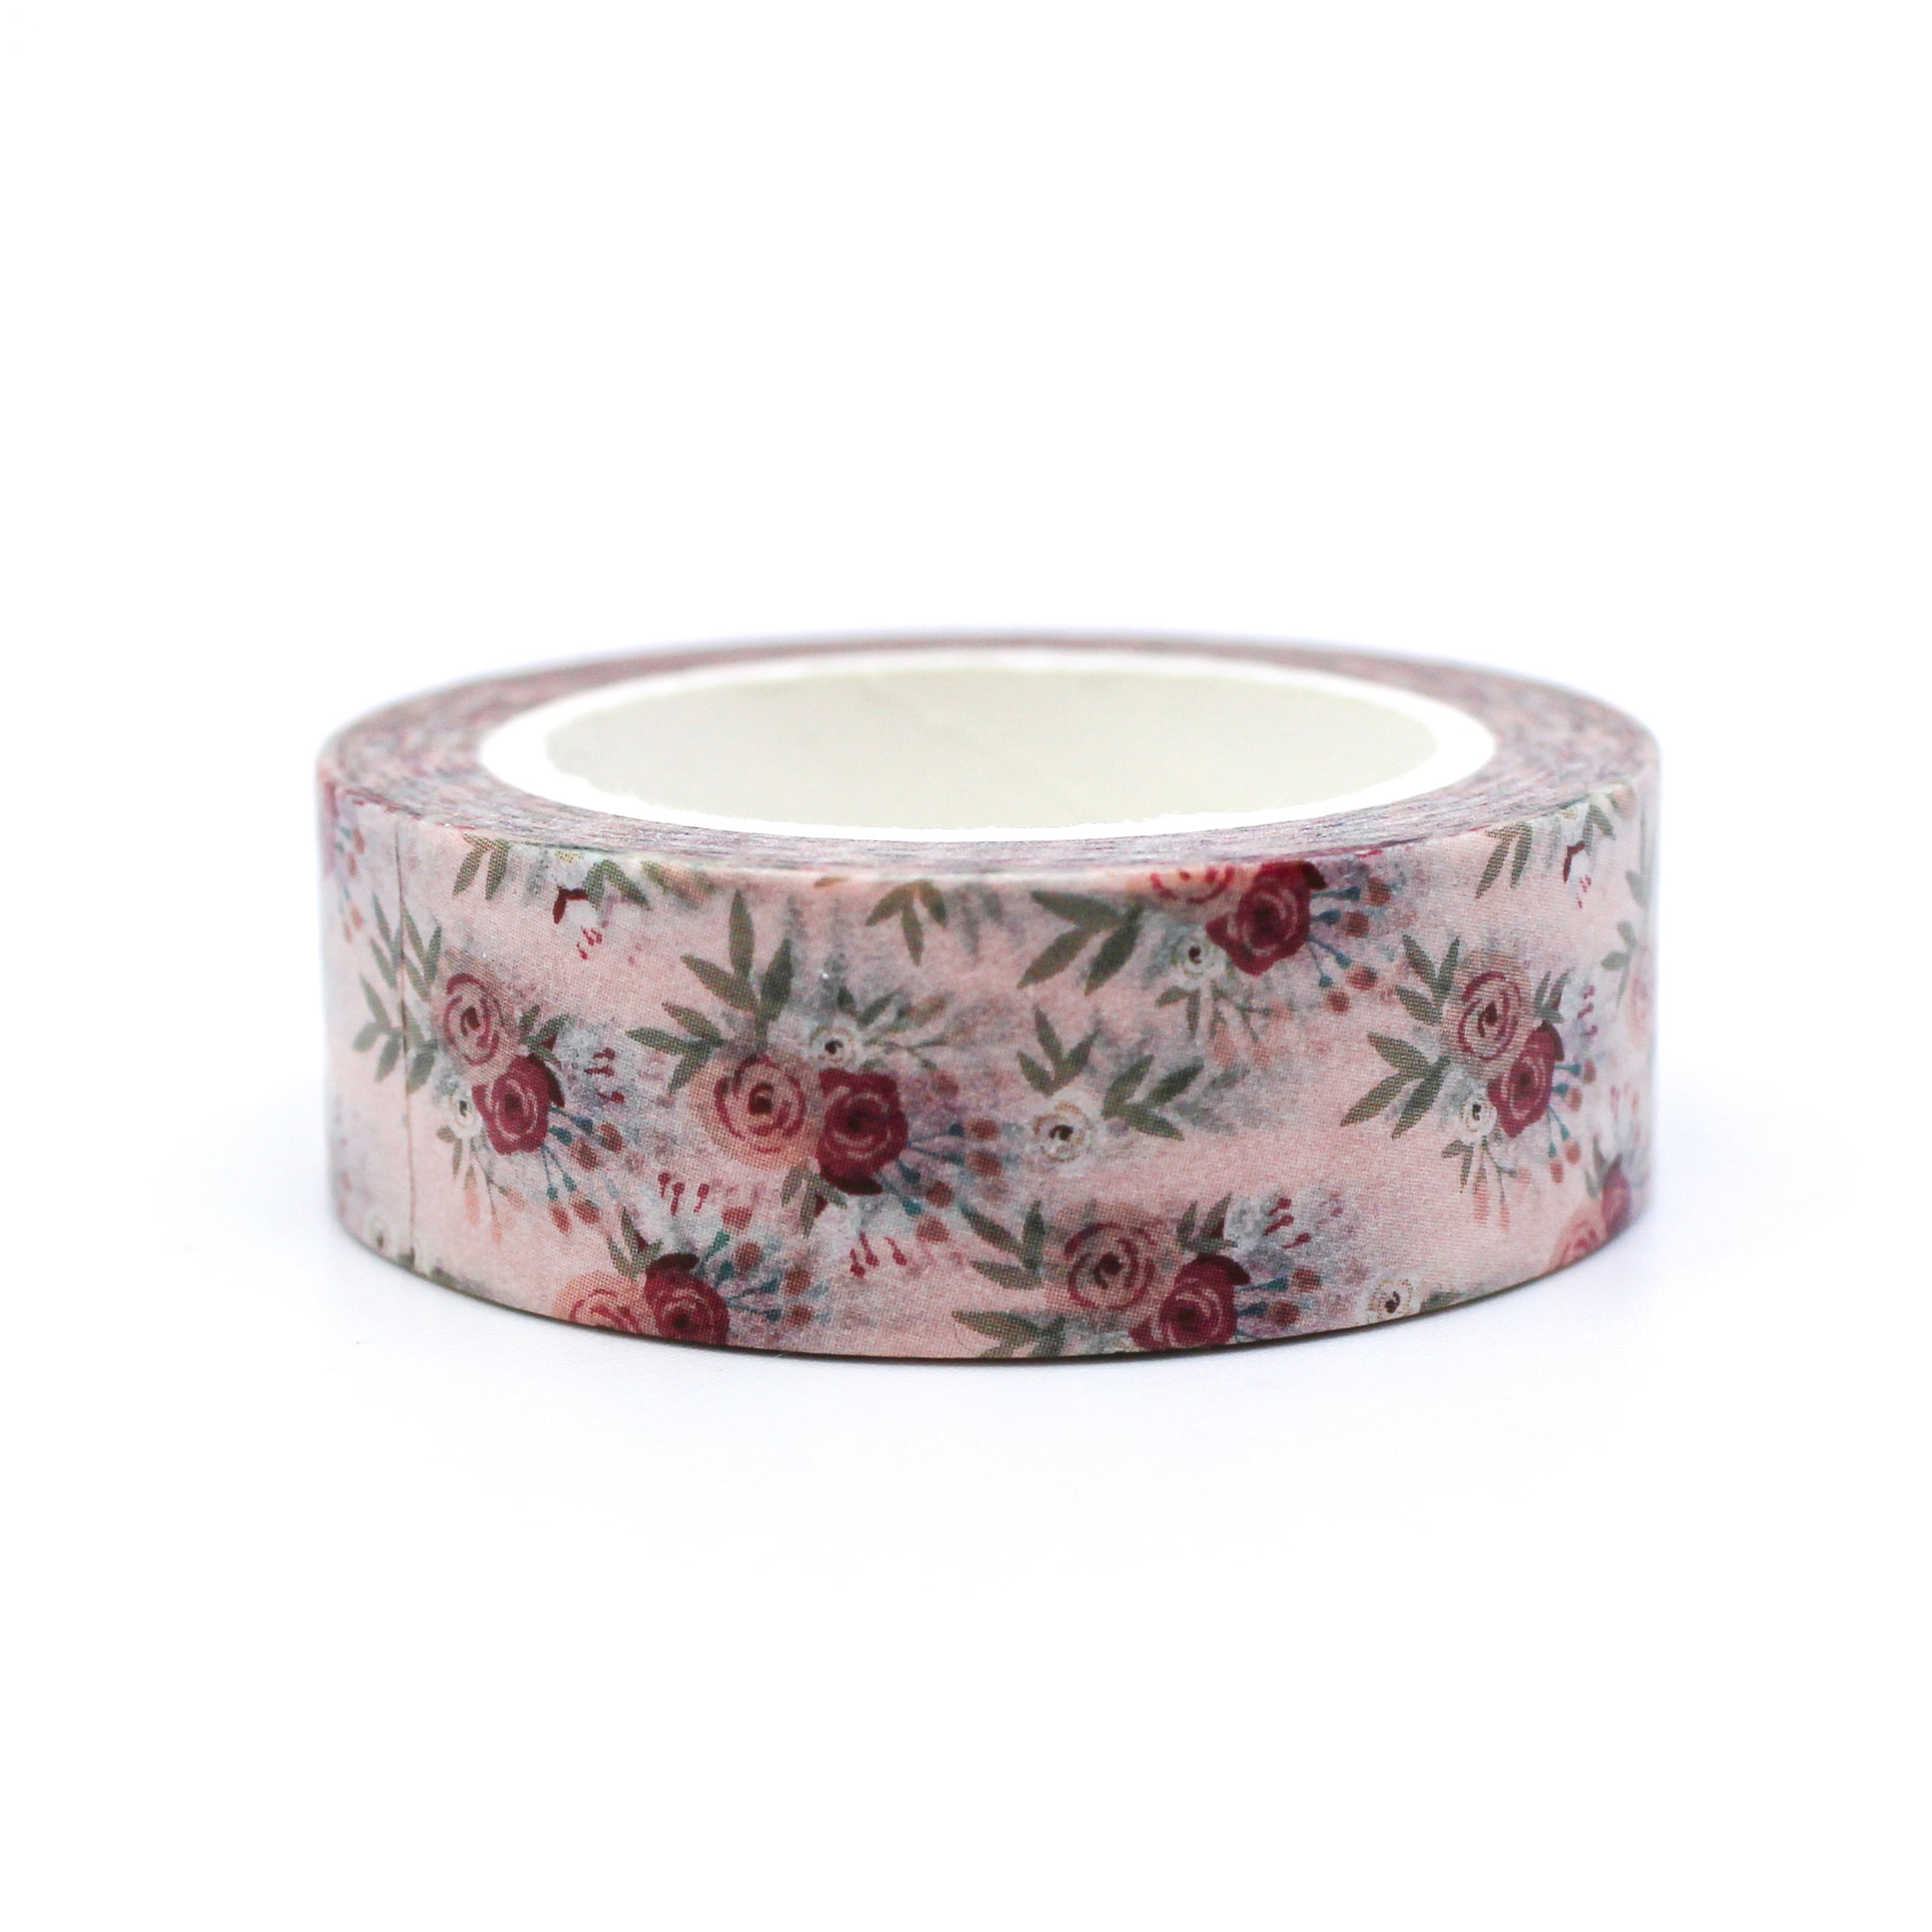 This a classy pink vintage florals washi tape from BBB Supplies Craft Shop